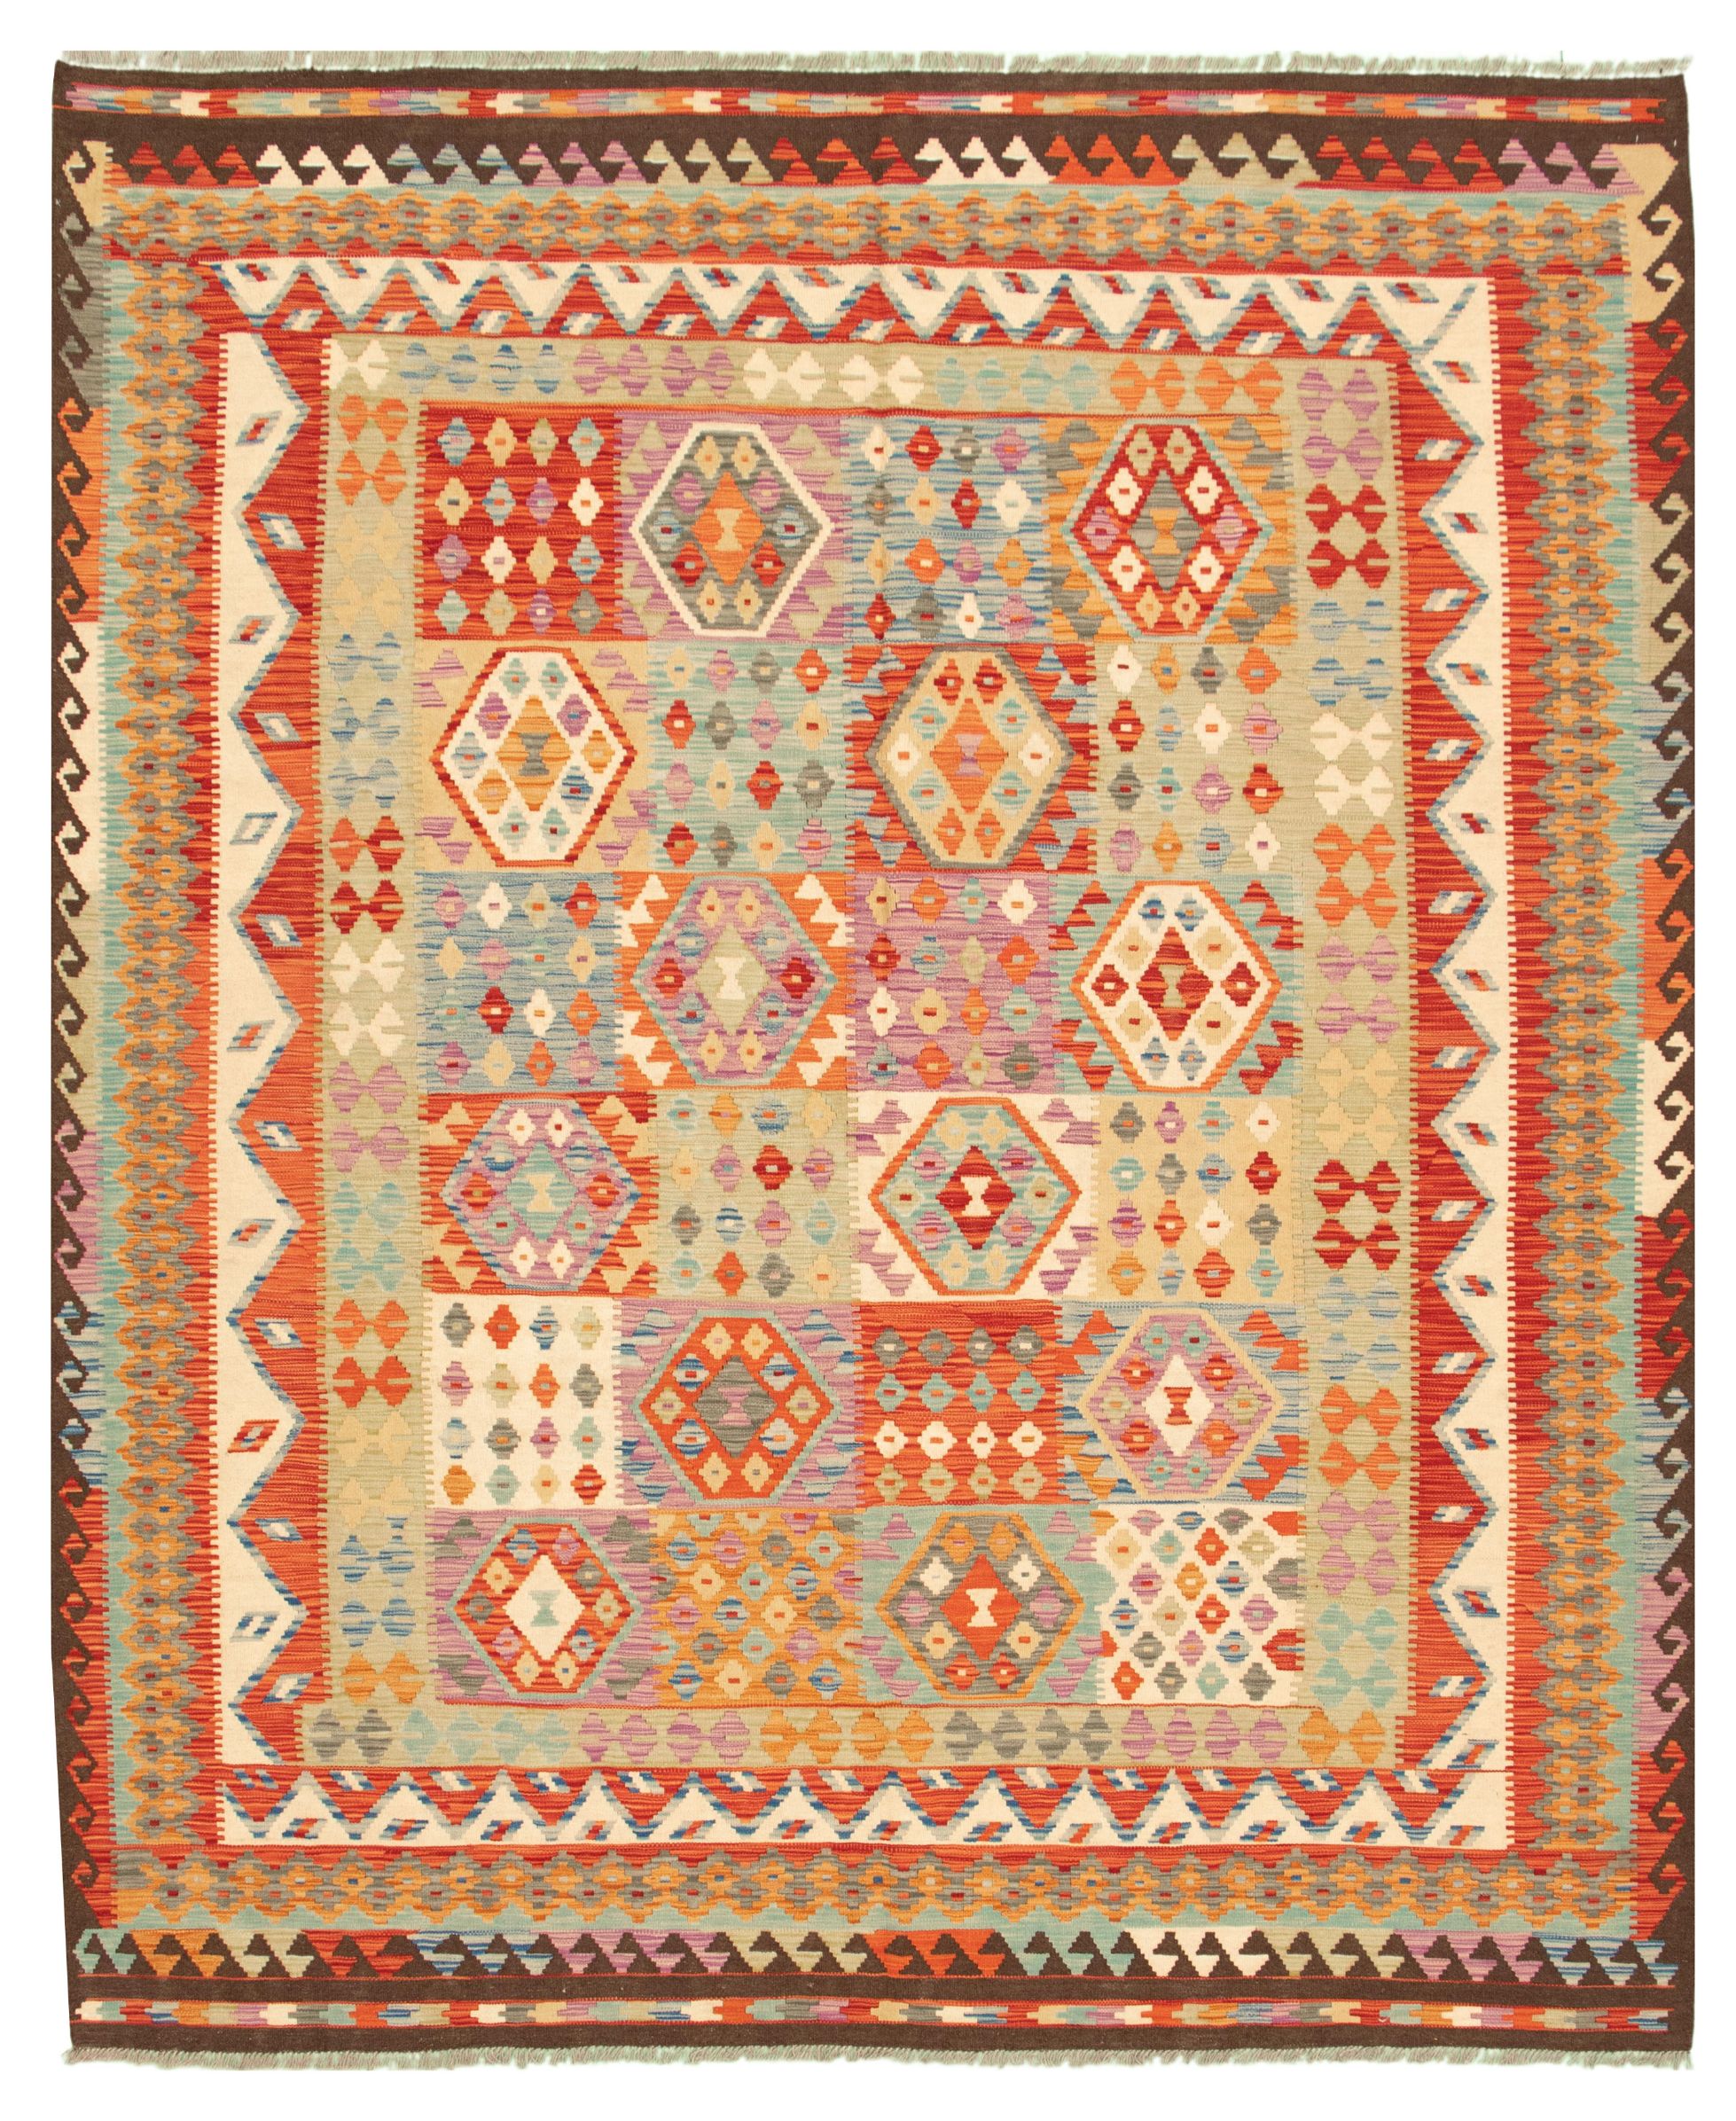 Hand woven Bold and Colorful  Khaki, Red Wool Kilim 8'1" x 9'10" Size: 8'1" x 9'10"  